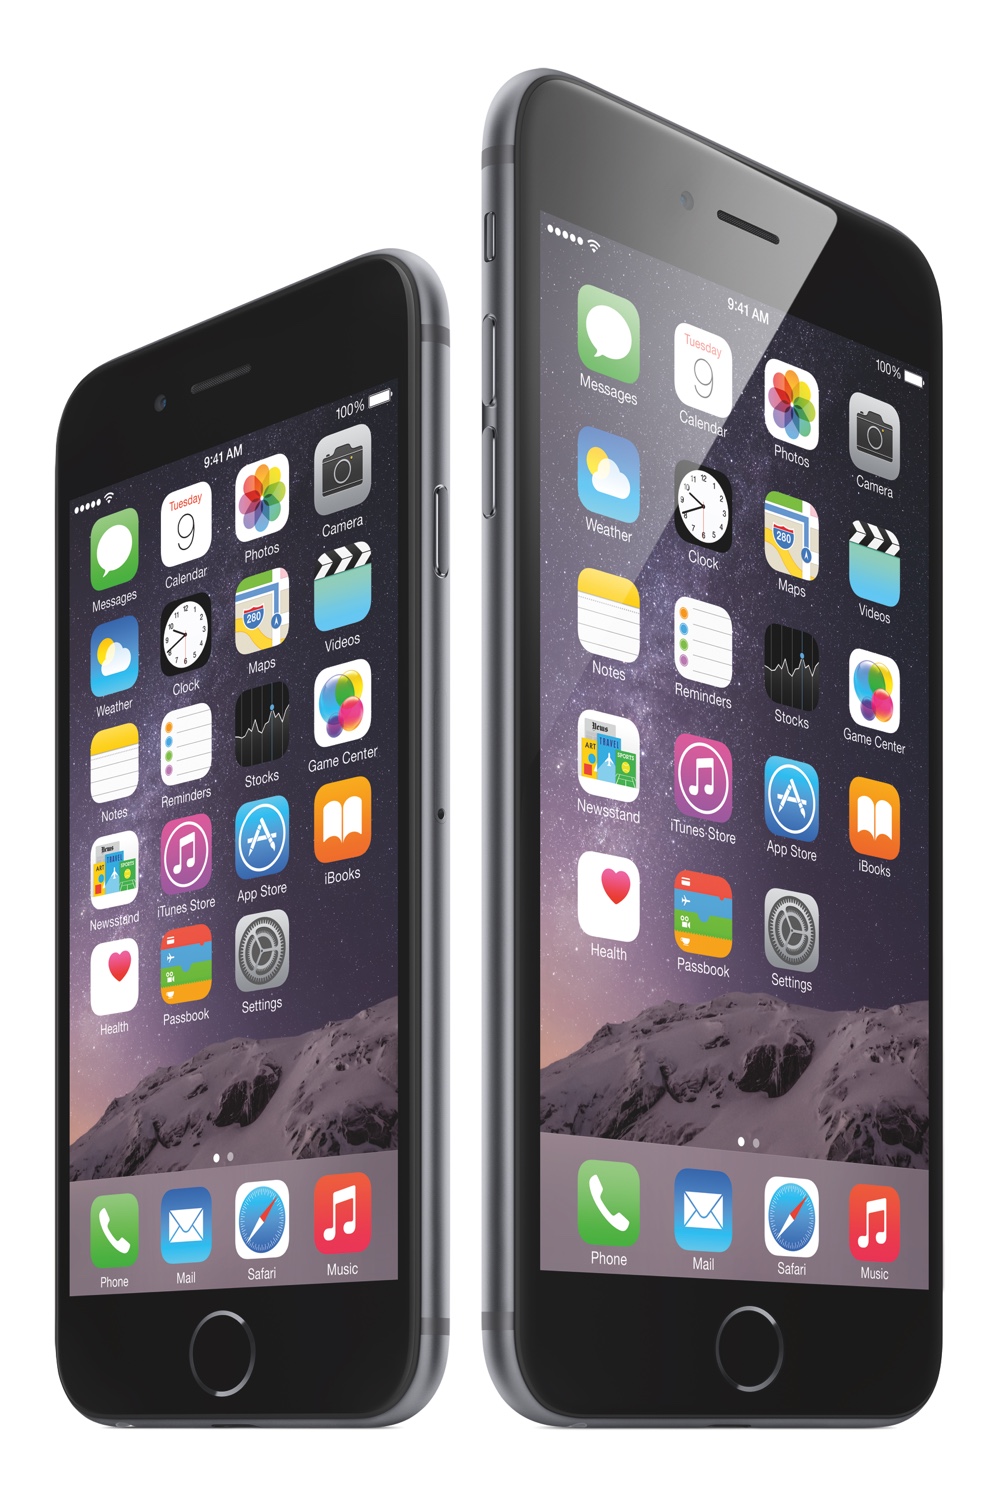 Apple's iPhone 6 (left) and iPhone 6 Plus (right) (Apple)